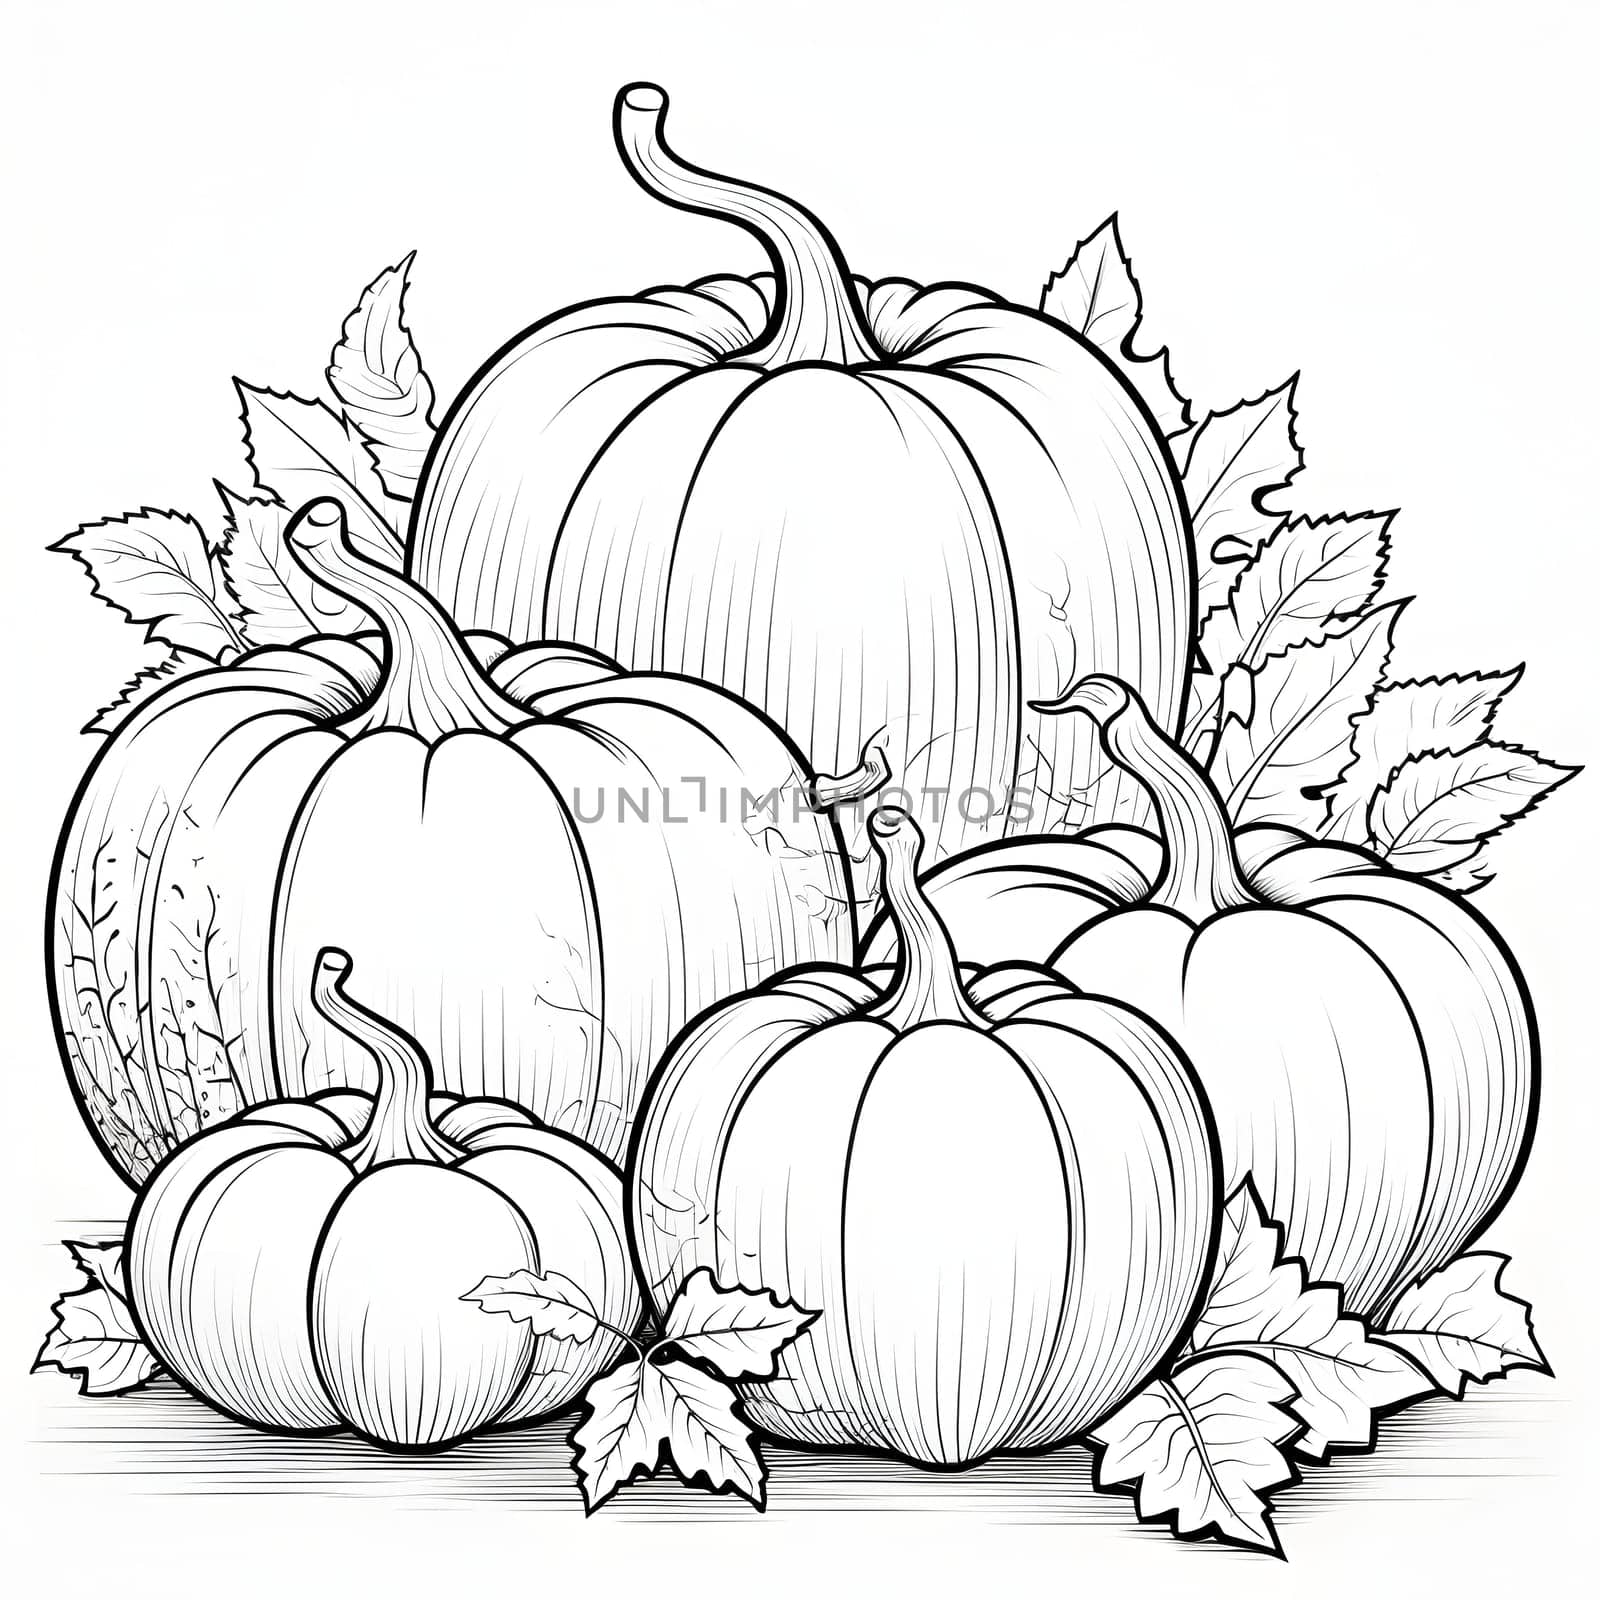 Black and white coloring book, pumpkin harvest and leaves. Pumpkin as a dish of thanksgiving for the harvest, picture on a white isolated background. Atmosphere of joy and celebration.